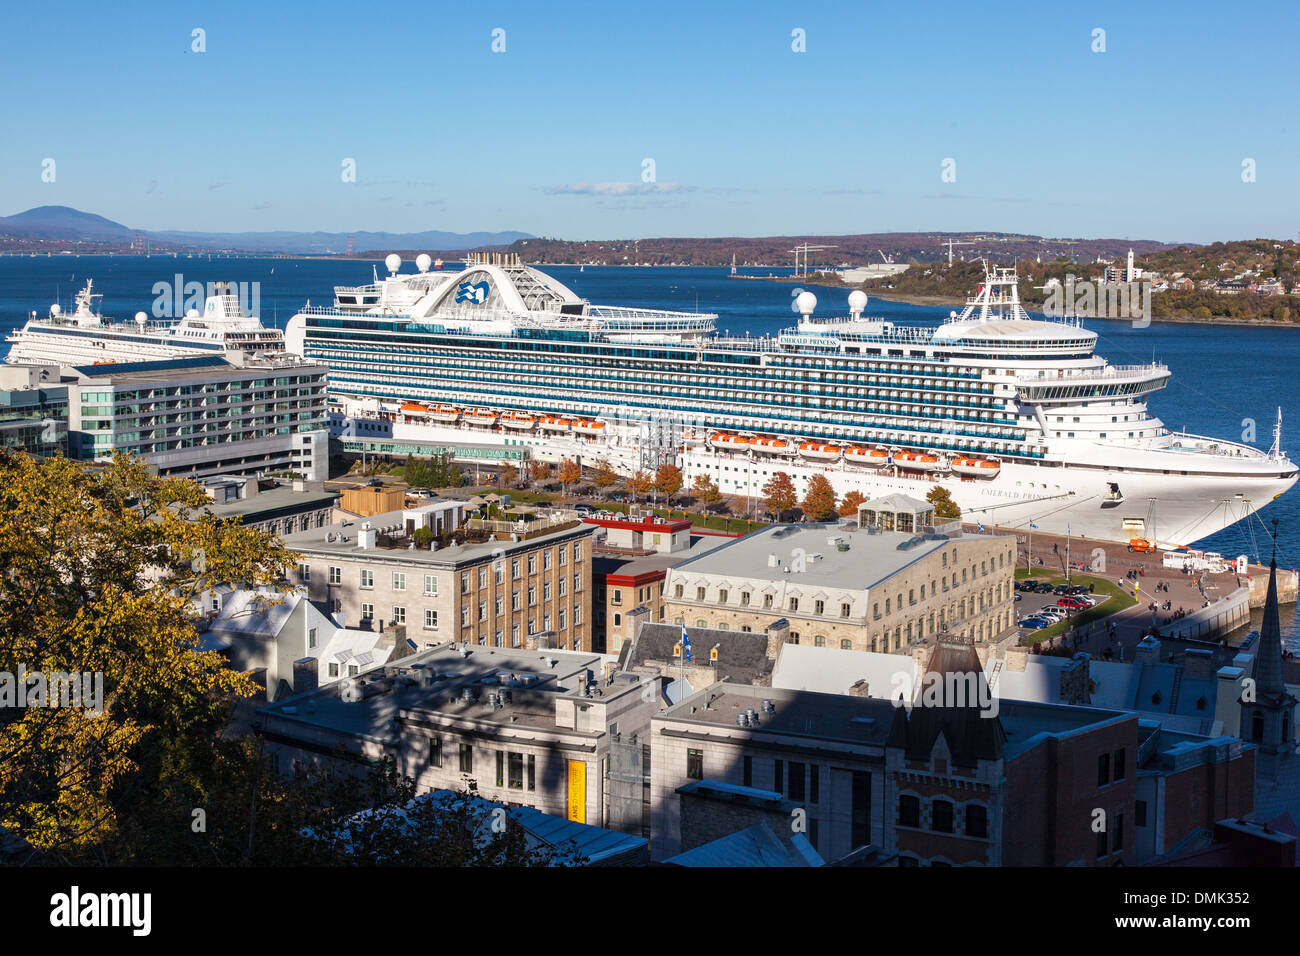 AN EMERALD PRINCESS CRUISE SHIP AT THE PORT OF QUEBEC, SAINT LAWRENCE RIVER, CITY OF QUEBEC, INDIAN SUMMER, AUTUMN COLORS, QUEBEC, CANADA Stock Photo